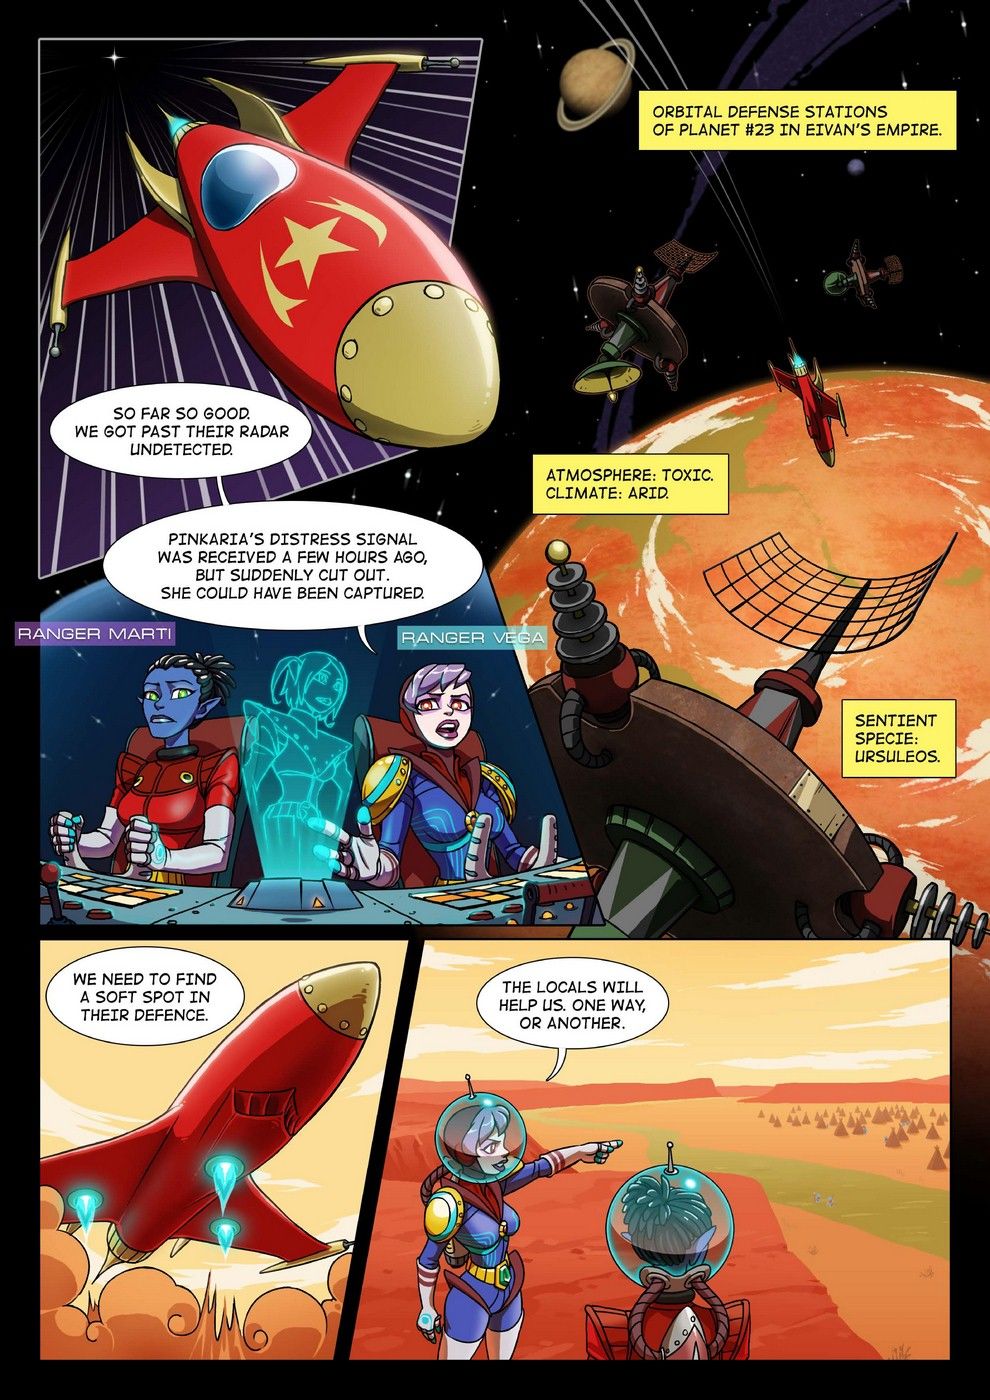 Adventures of the Brave Rangers - PawFeather page 2